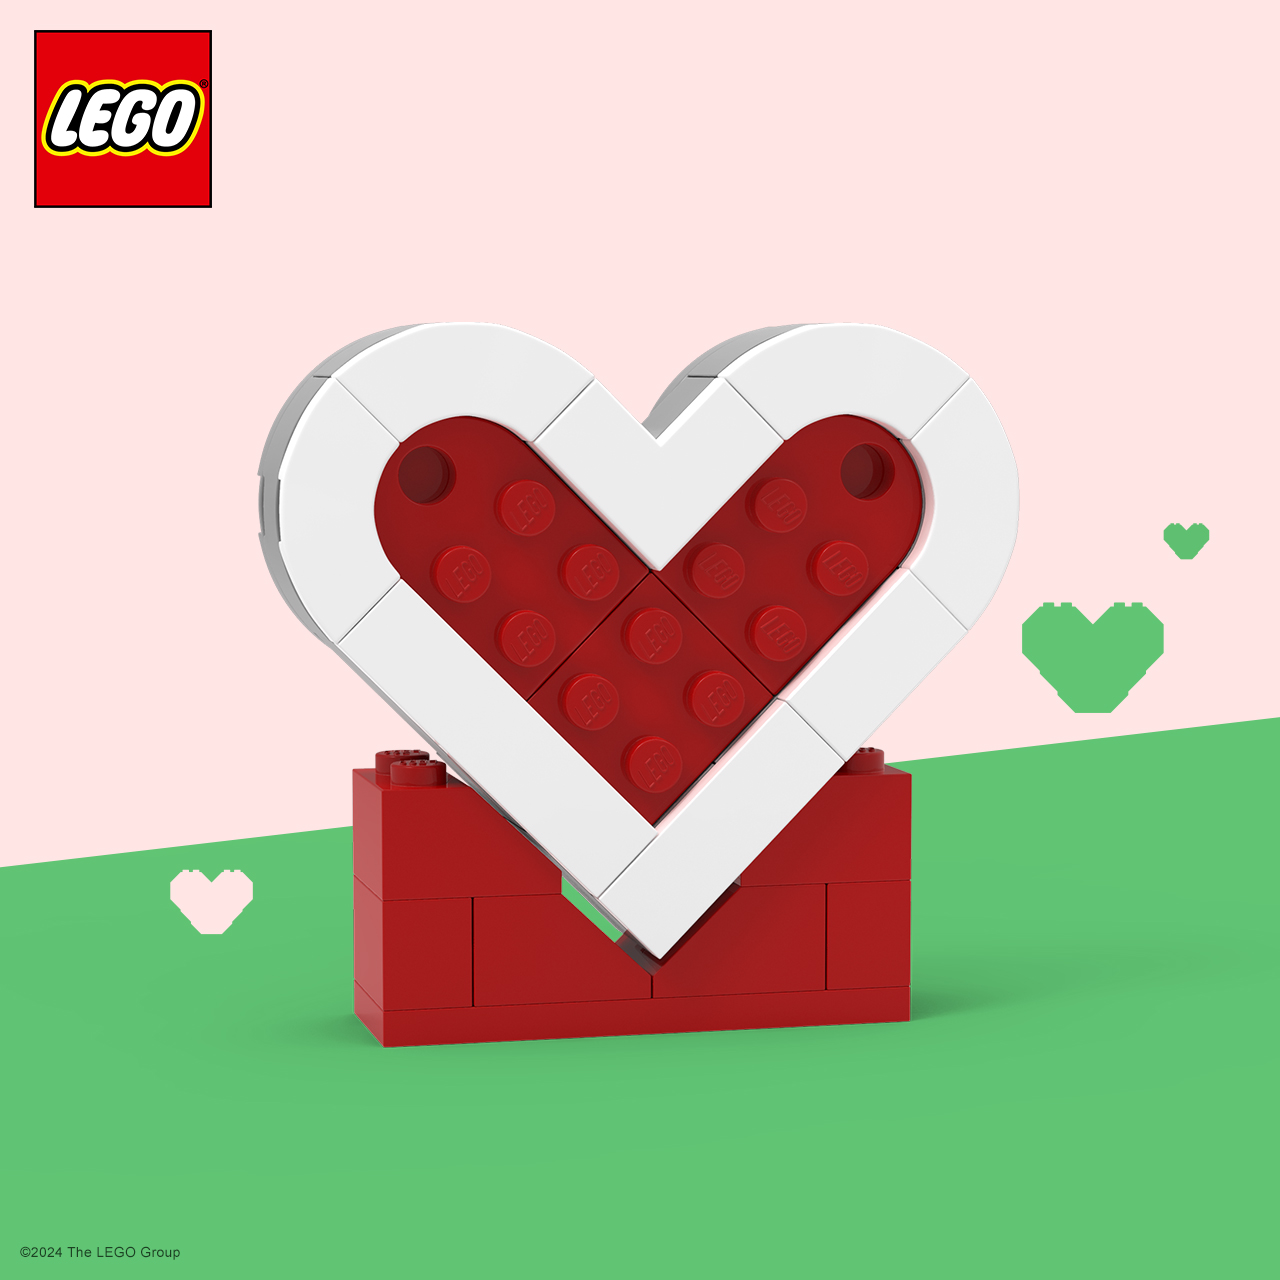 LEGO Campaign 19 Build a heart and take it home EN 1280x1280 1